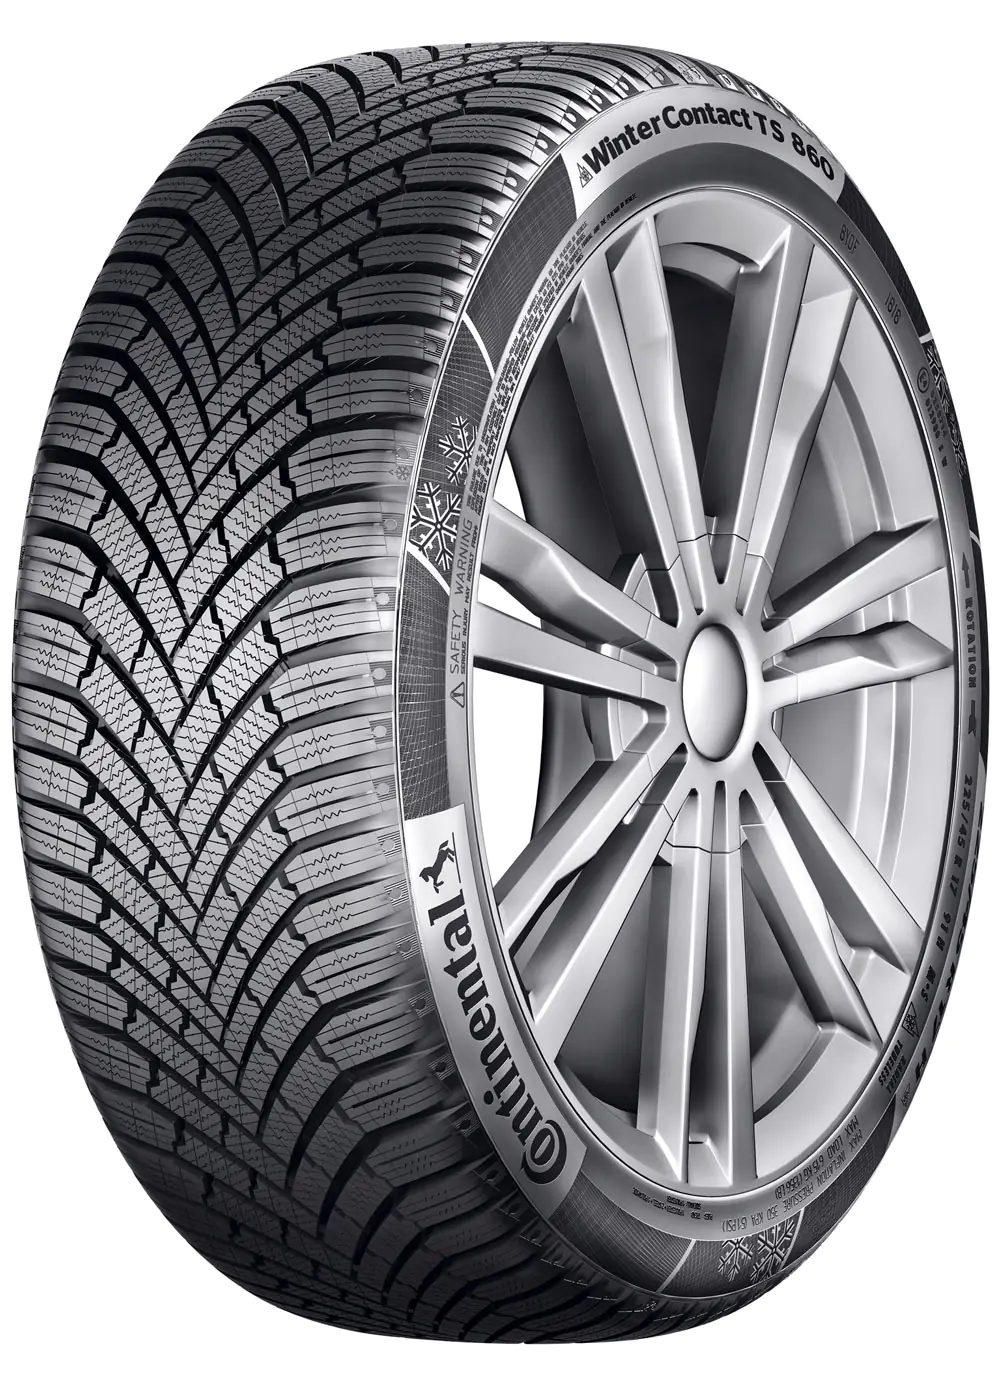 Gomme Autovettura Continental 275/35 R22 104V WinterContact TS860 S XL M+S Invernale